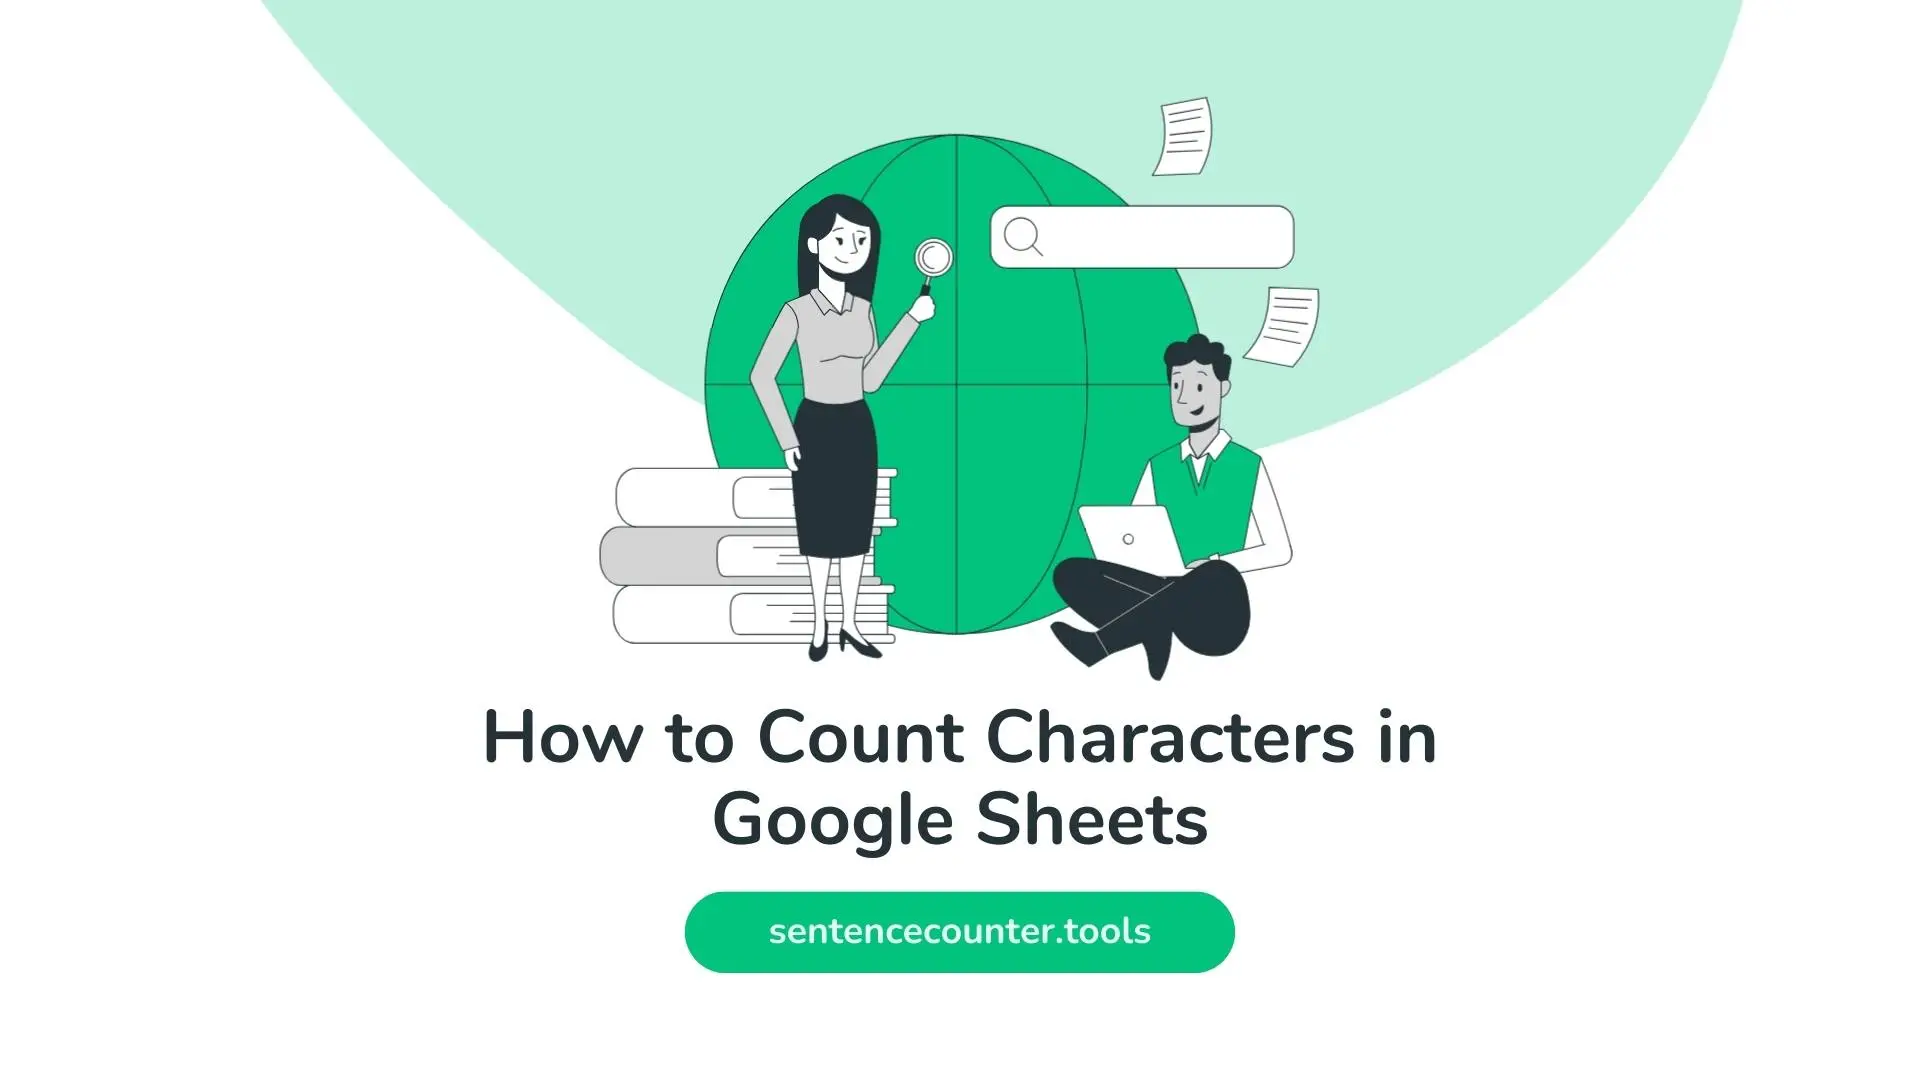 Count Characters in Google Sheets